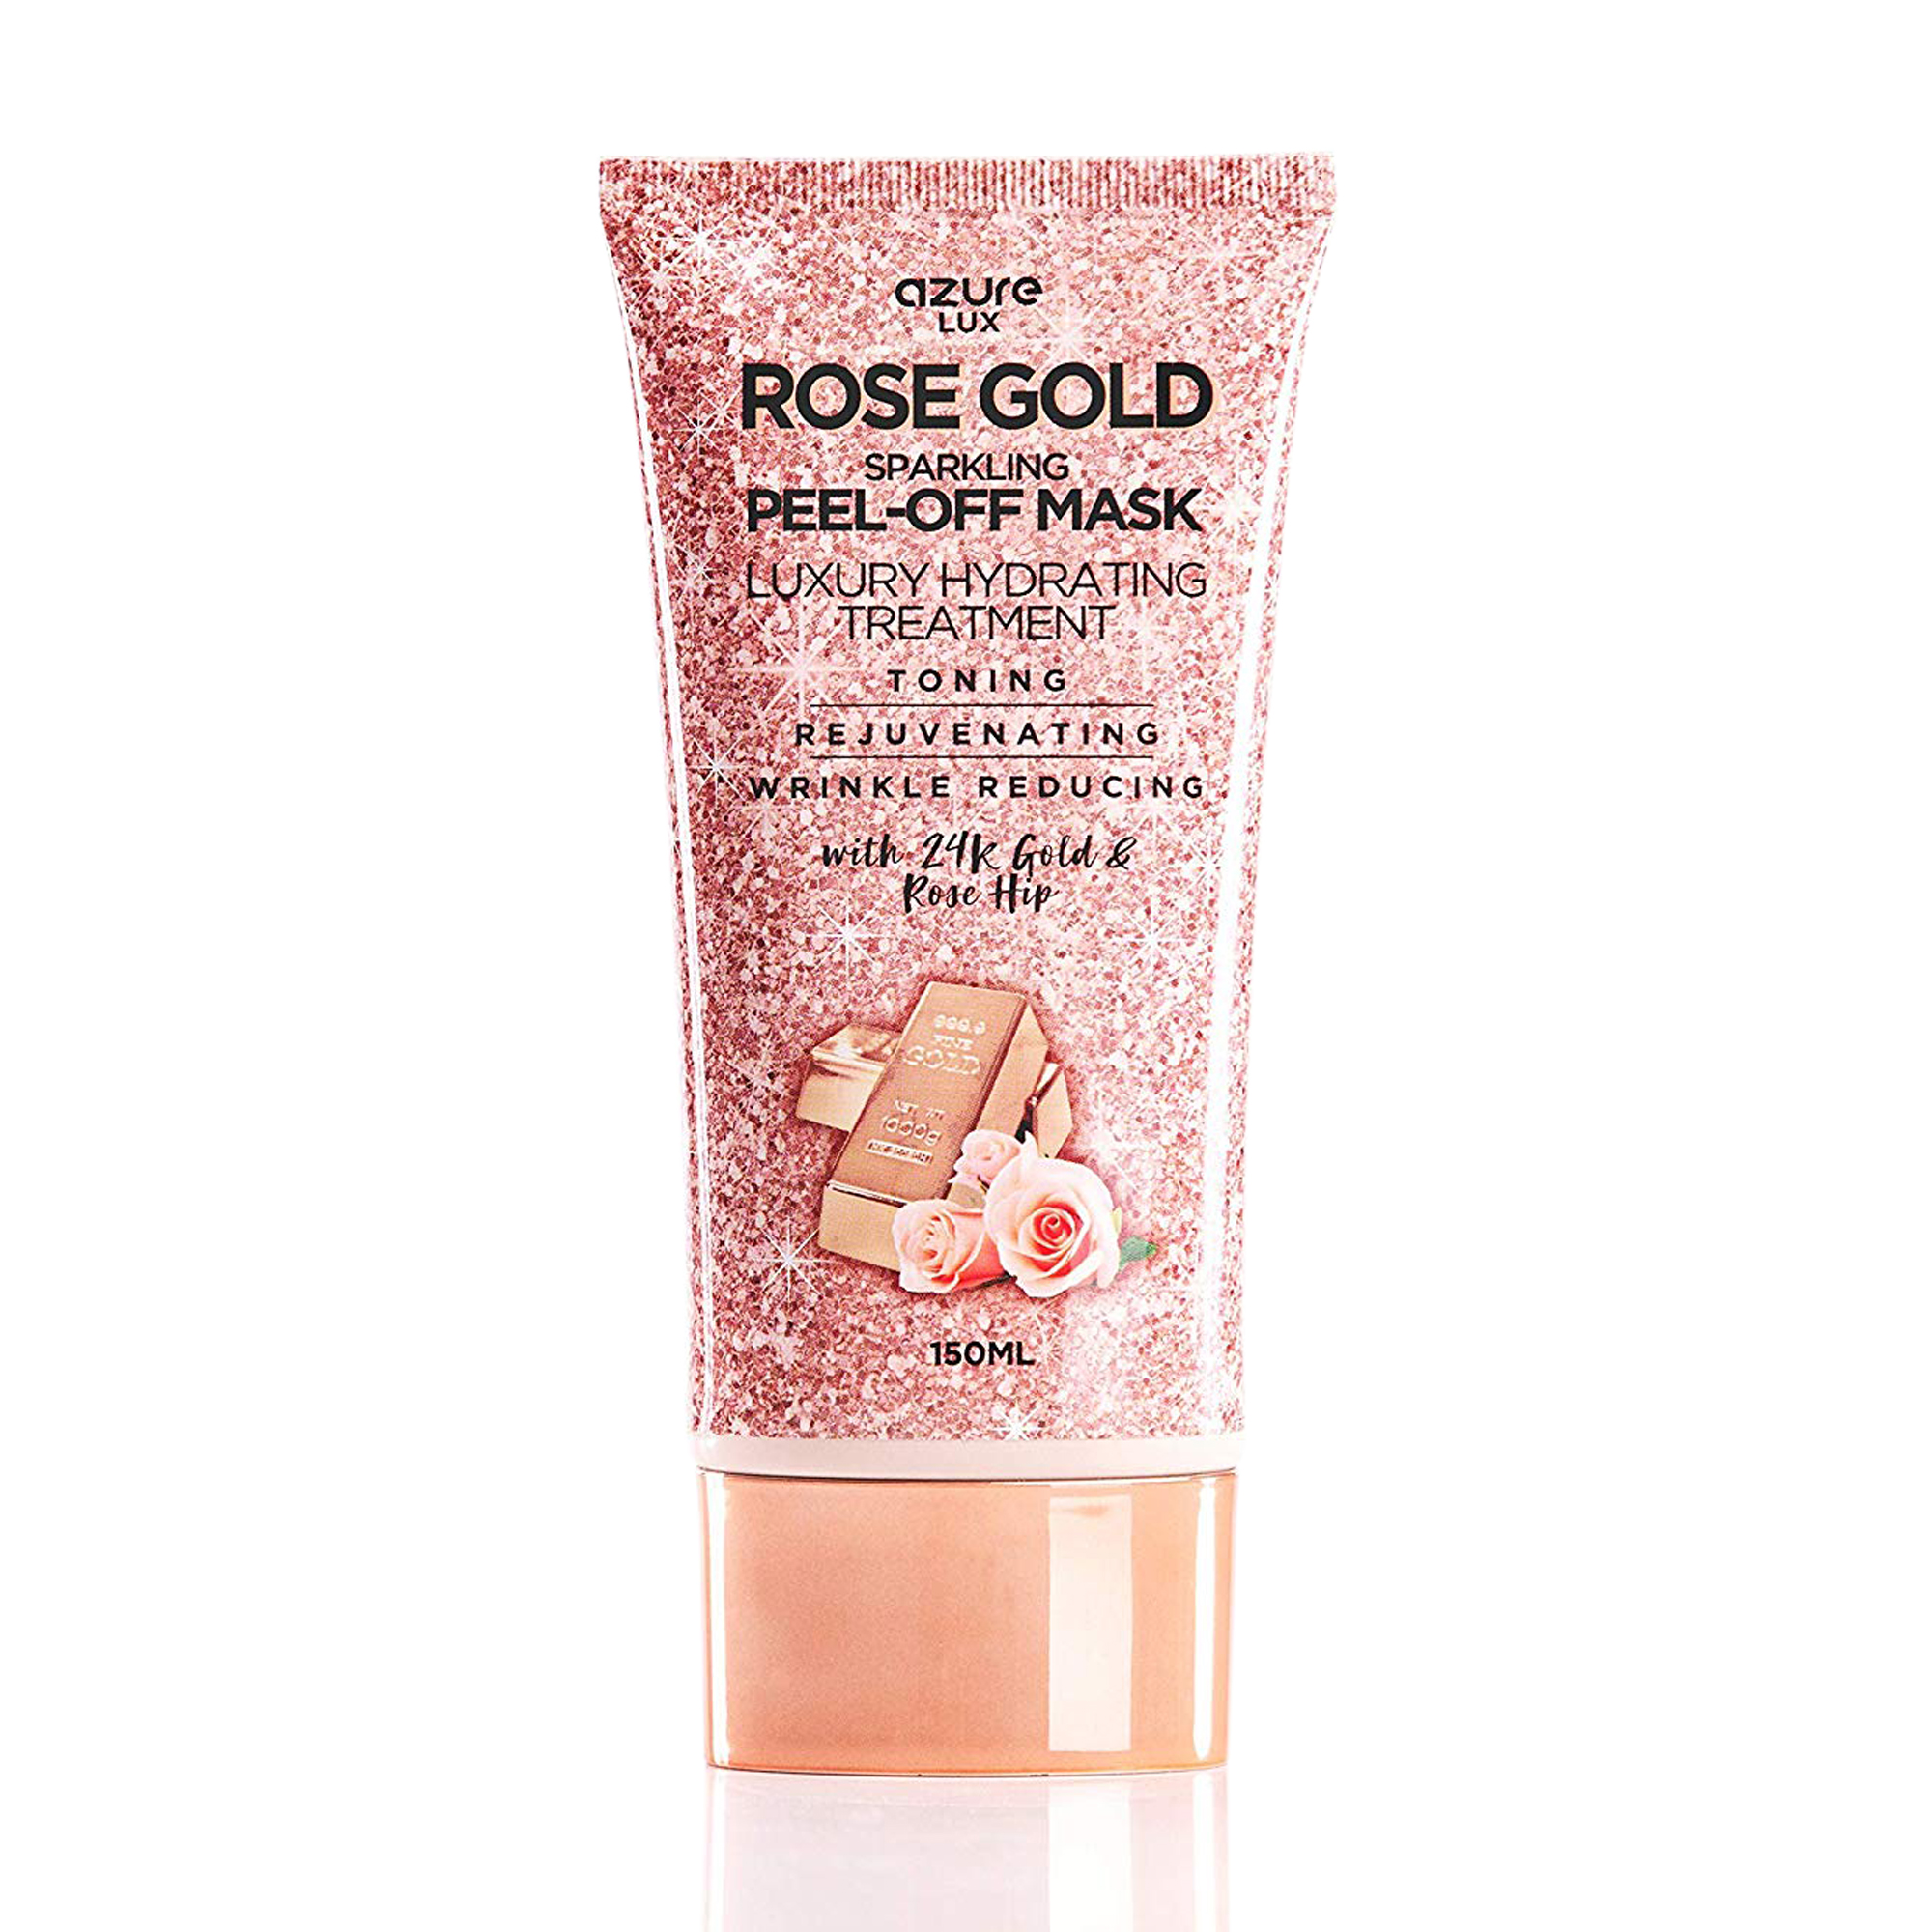 AZURE Rose Gold Hydrating Peel Off Face Mask- Anti Aging, Toning & Rejuvenating - Removes Blackheads, Dirt & Oils - With 24K Gold and Rose Hip Oil - Skin Care Made in Korea - 150mL / 5.07 fl.oz. - image 1 of 6